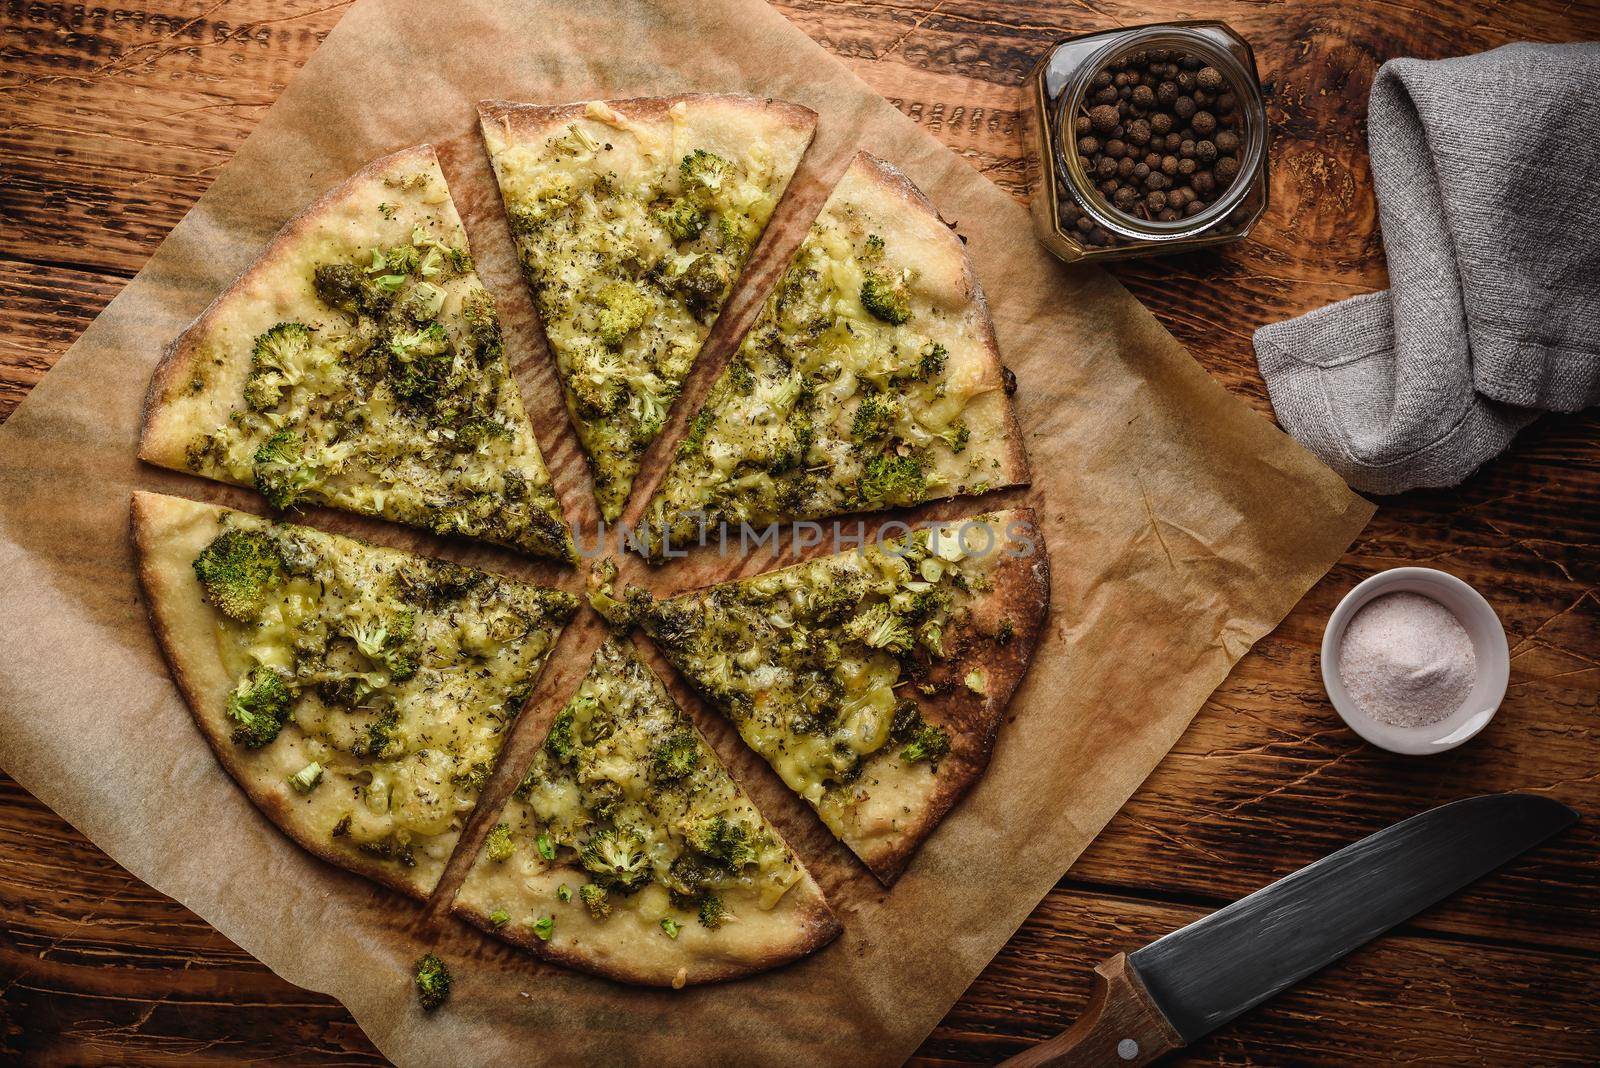 Pizza with broccoli and cheese by Seva_blsv